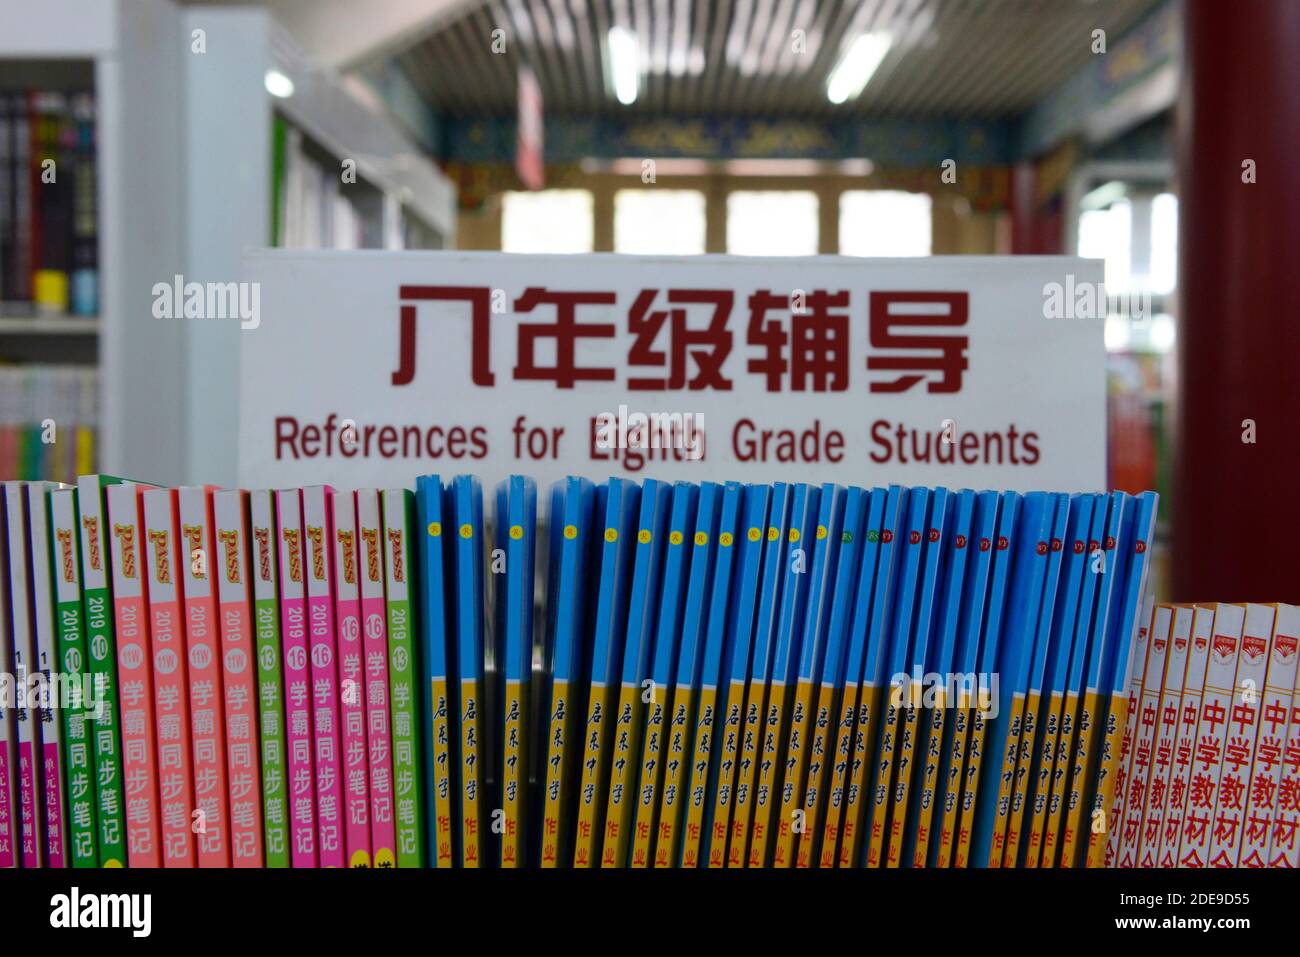 Reference books for school students in a Xinhua bookshop in Xicheng district, Beijing, China Stock Photo